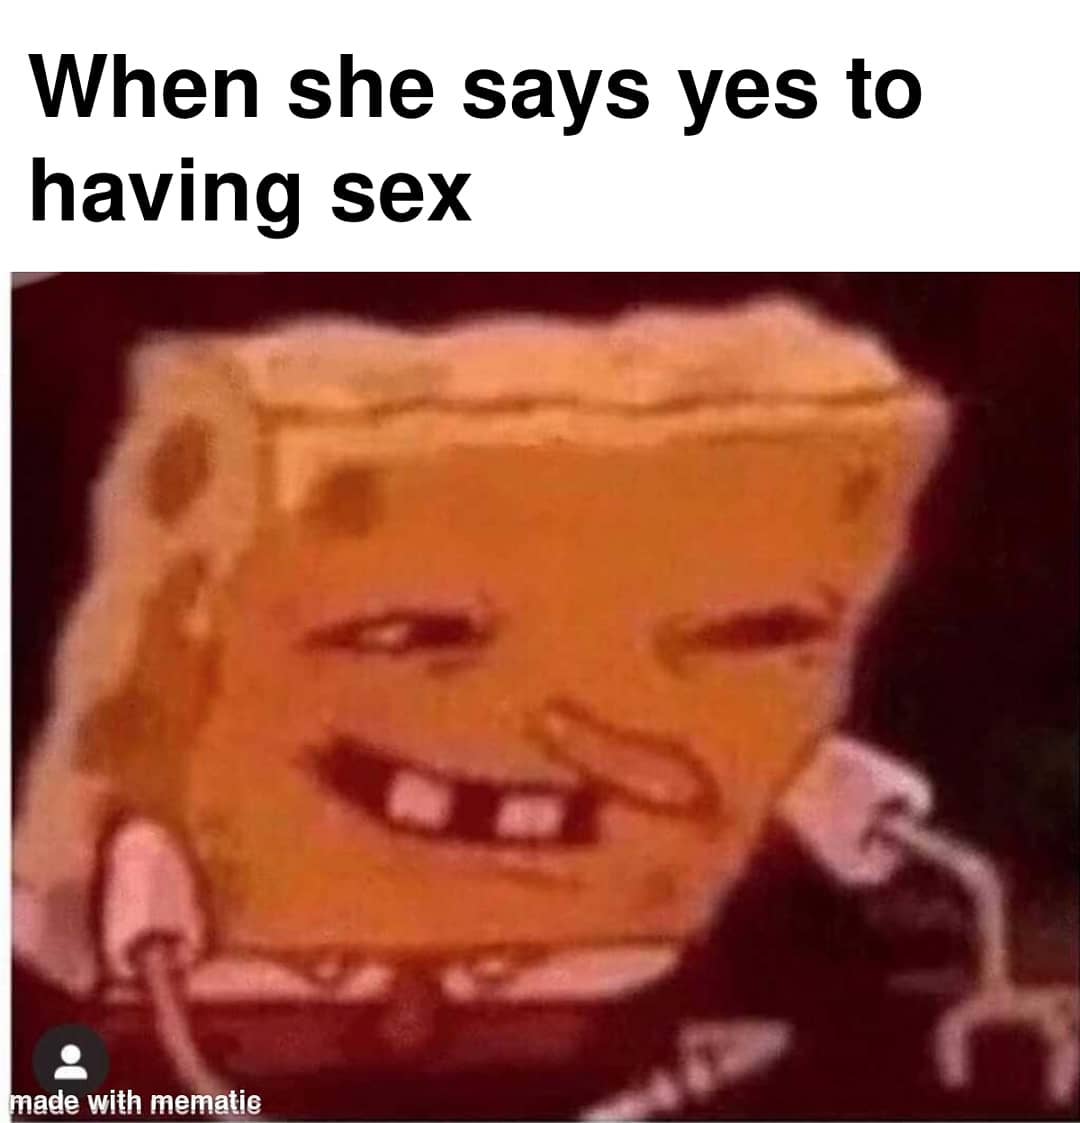 When she says yes to having sex.